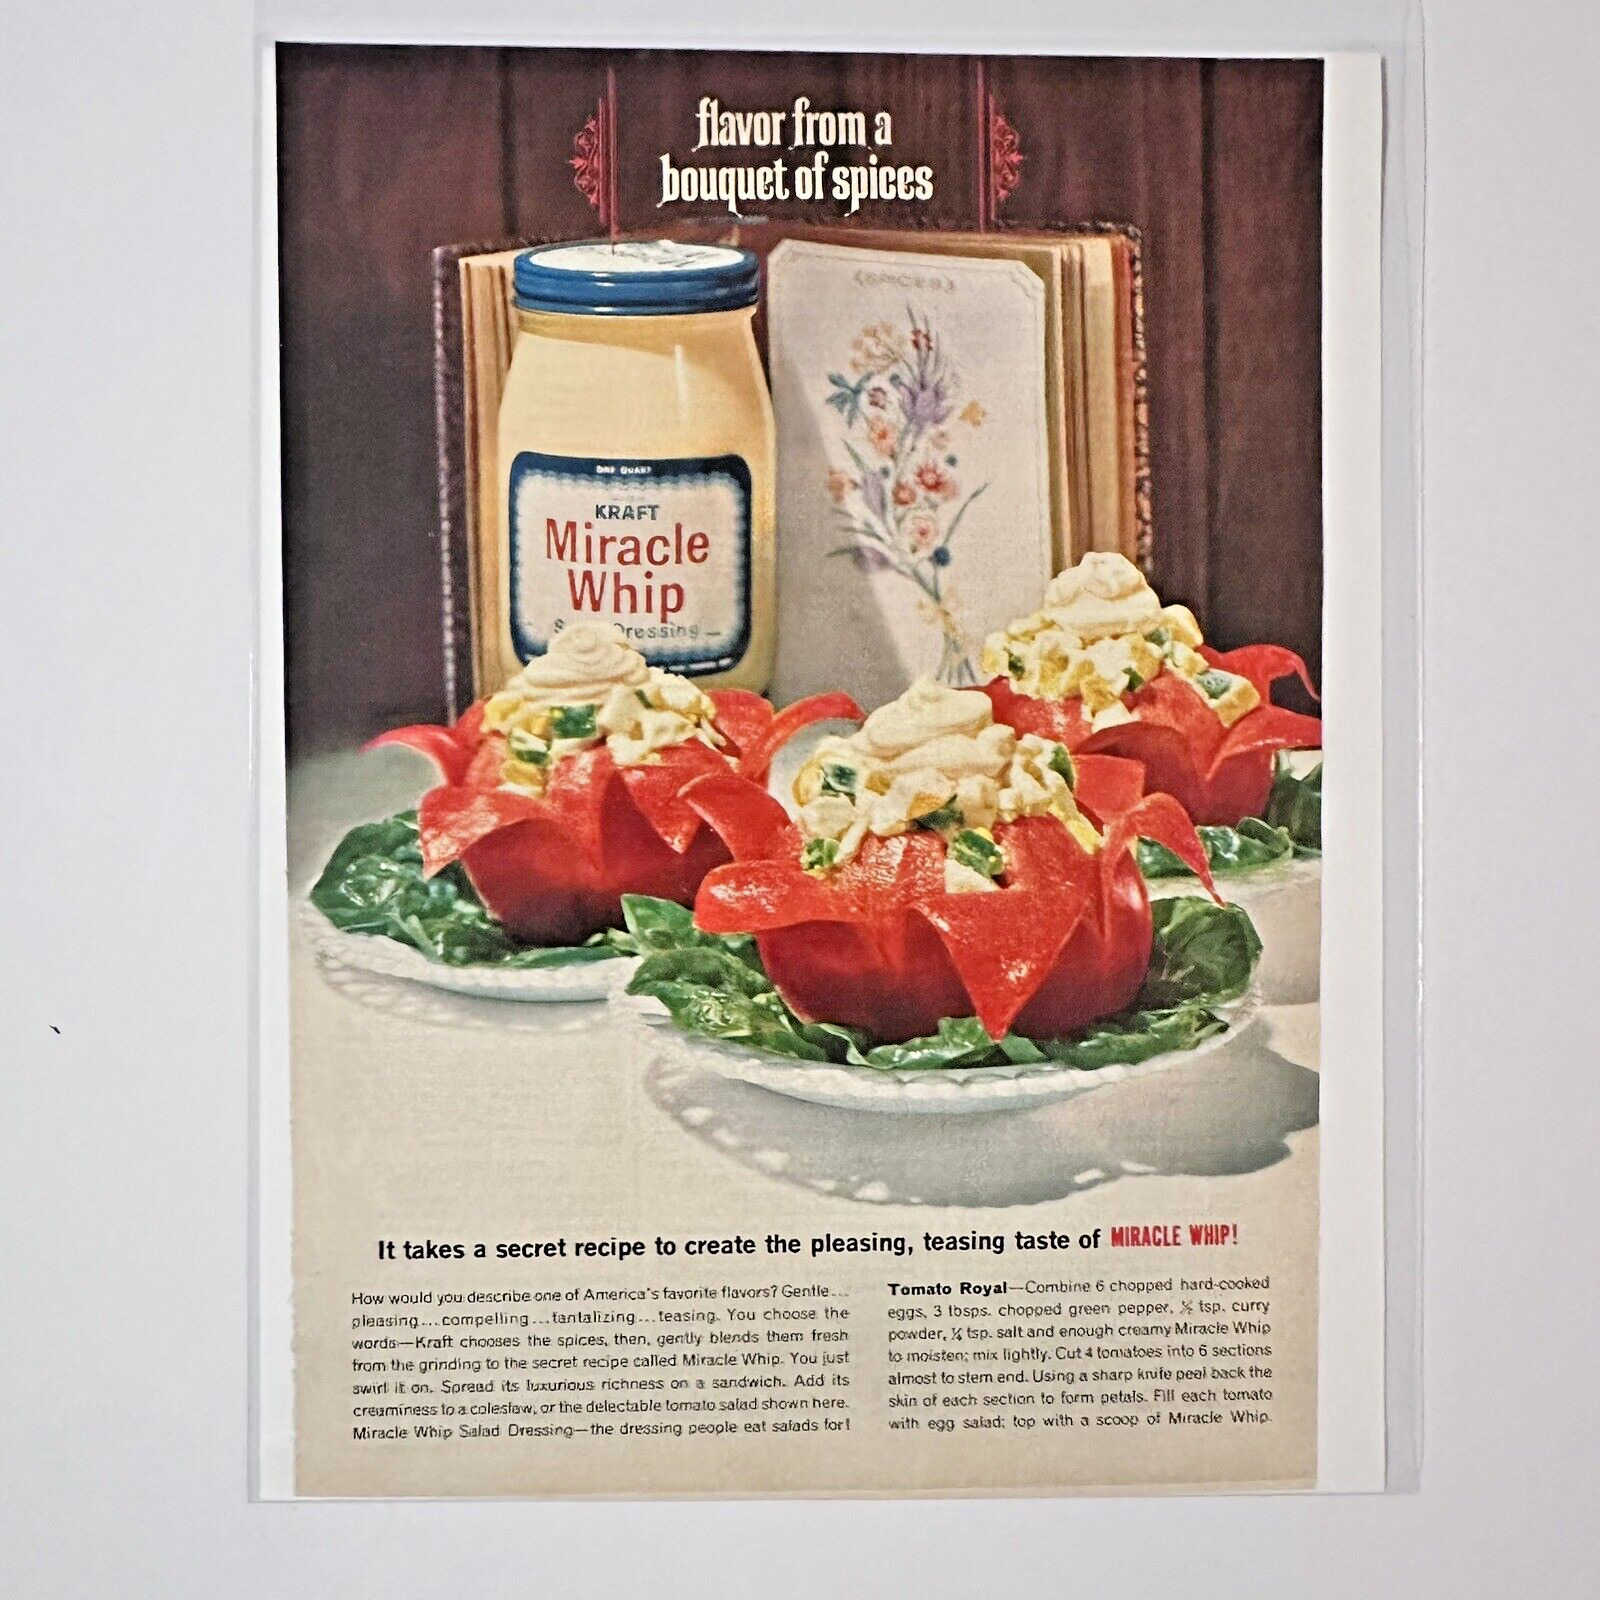 1964 Kraft Miracle Whip Print Ad Recipes Flavor Bouquet Spices Woman’s Day Mag